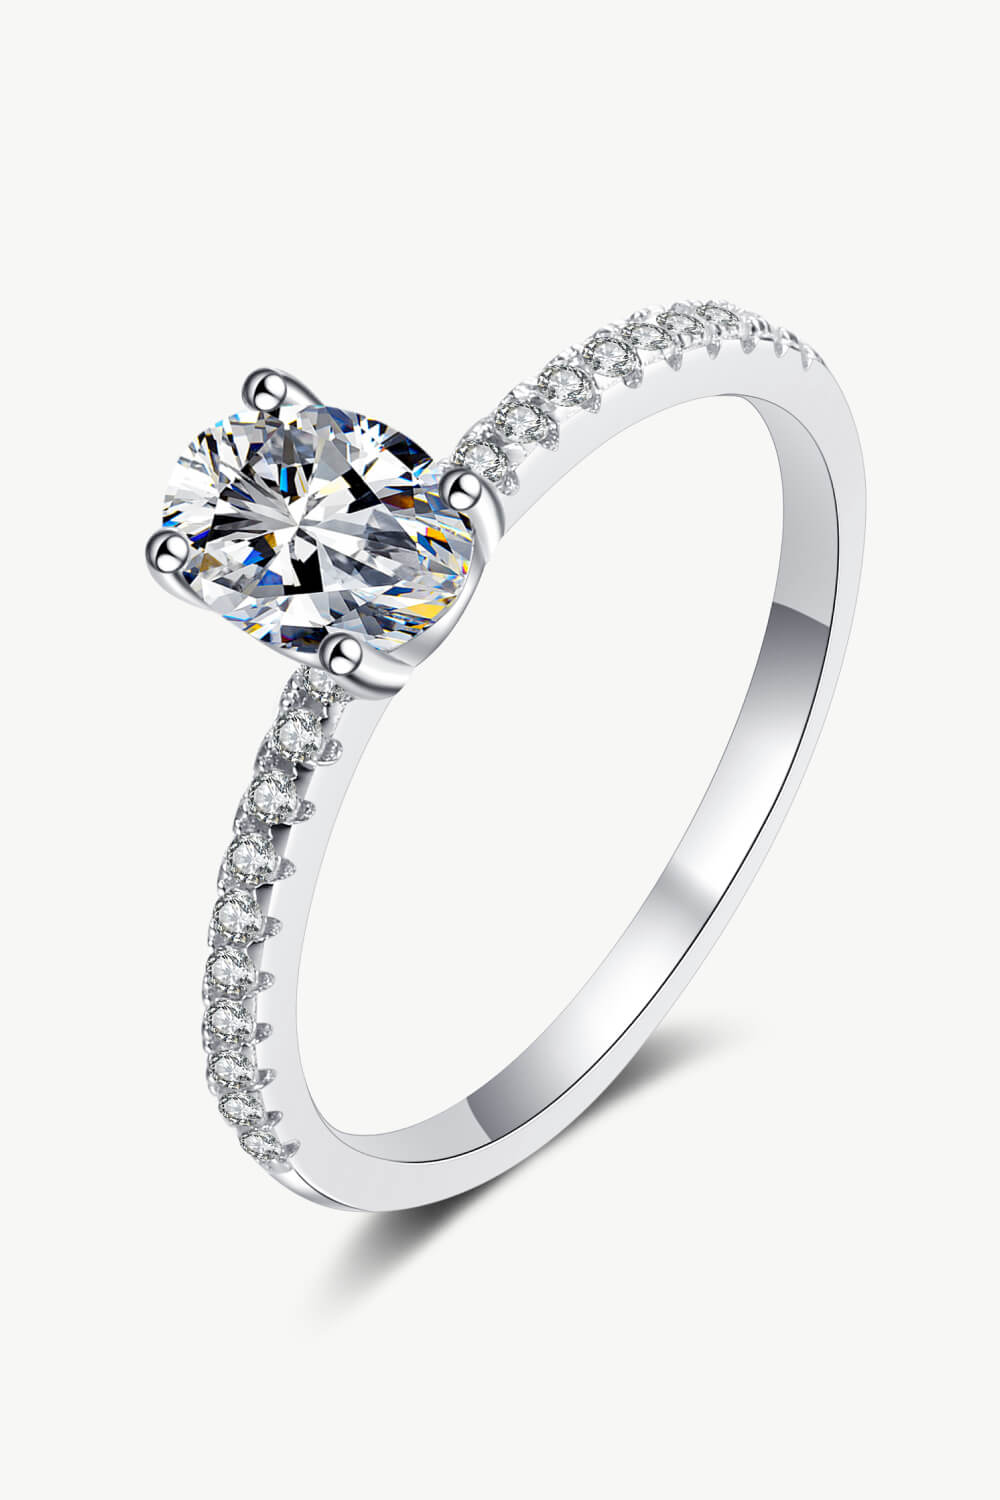 1 Carat Moissanite Oval Ring Sterling Silver Inlaid with Zircon Accents